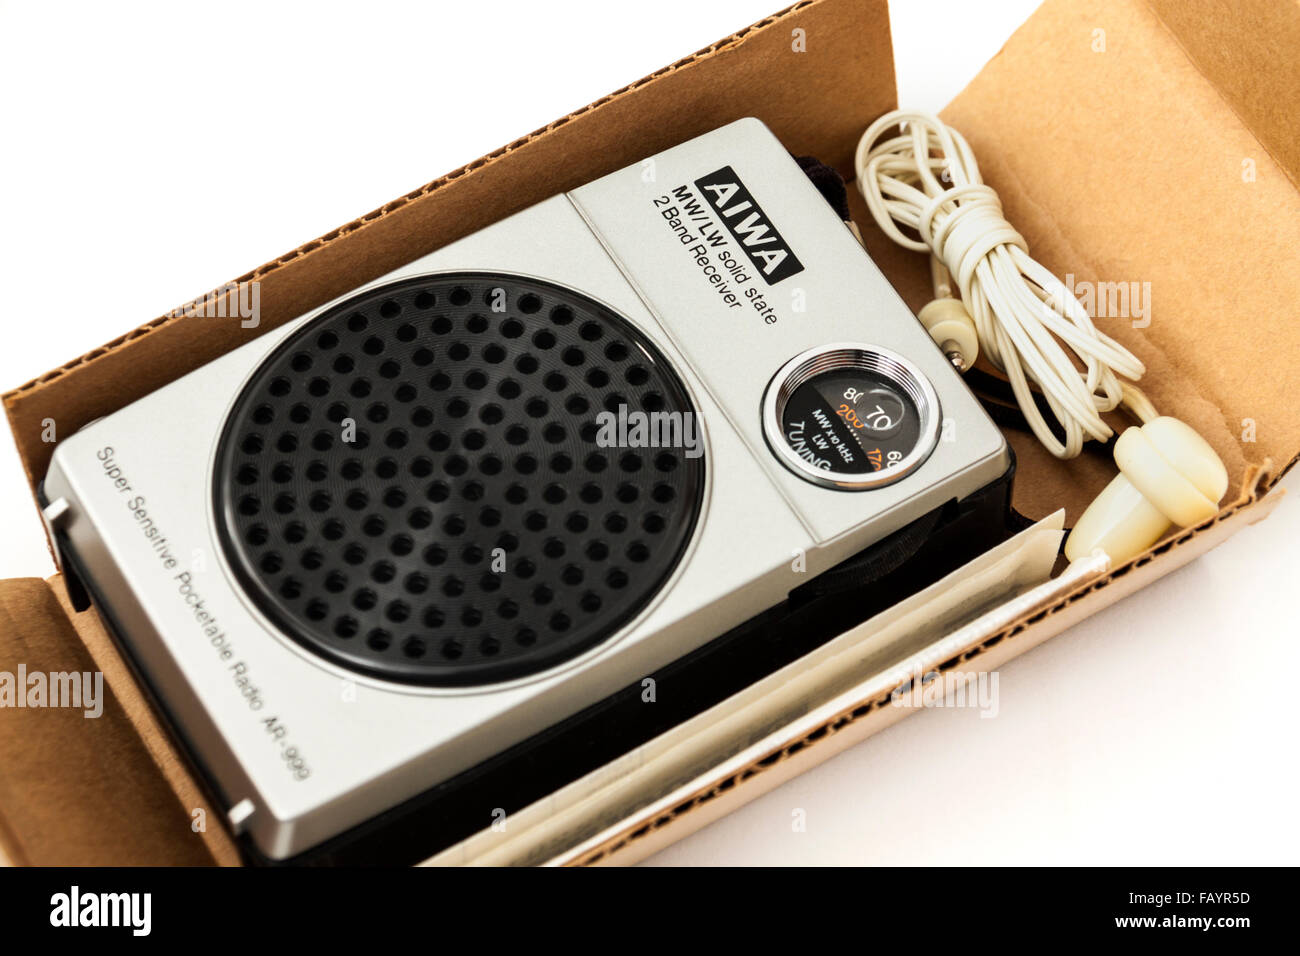 Vintage Aiwa AR-999 Super Sensitive Pocketable Transistor Radio (MW/LW), purchased new from Woolworths (UK) for £5.99 in 1980. Stock Photo